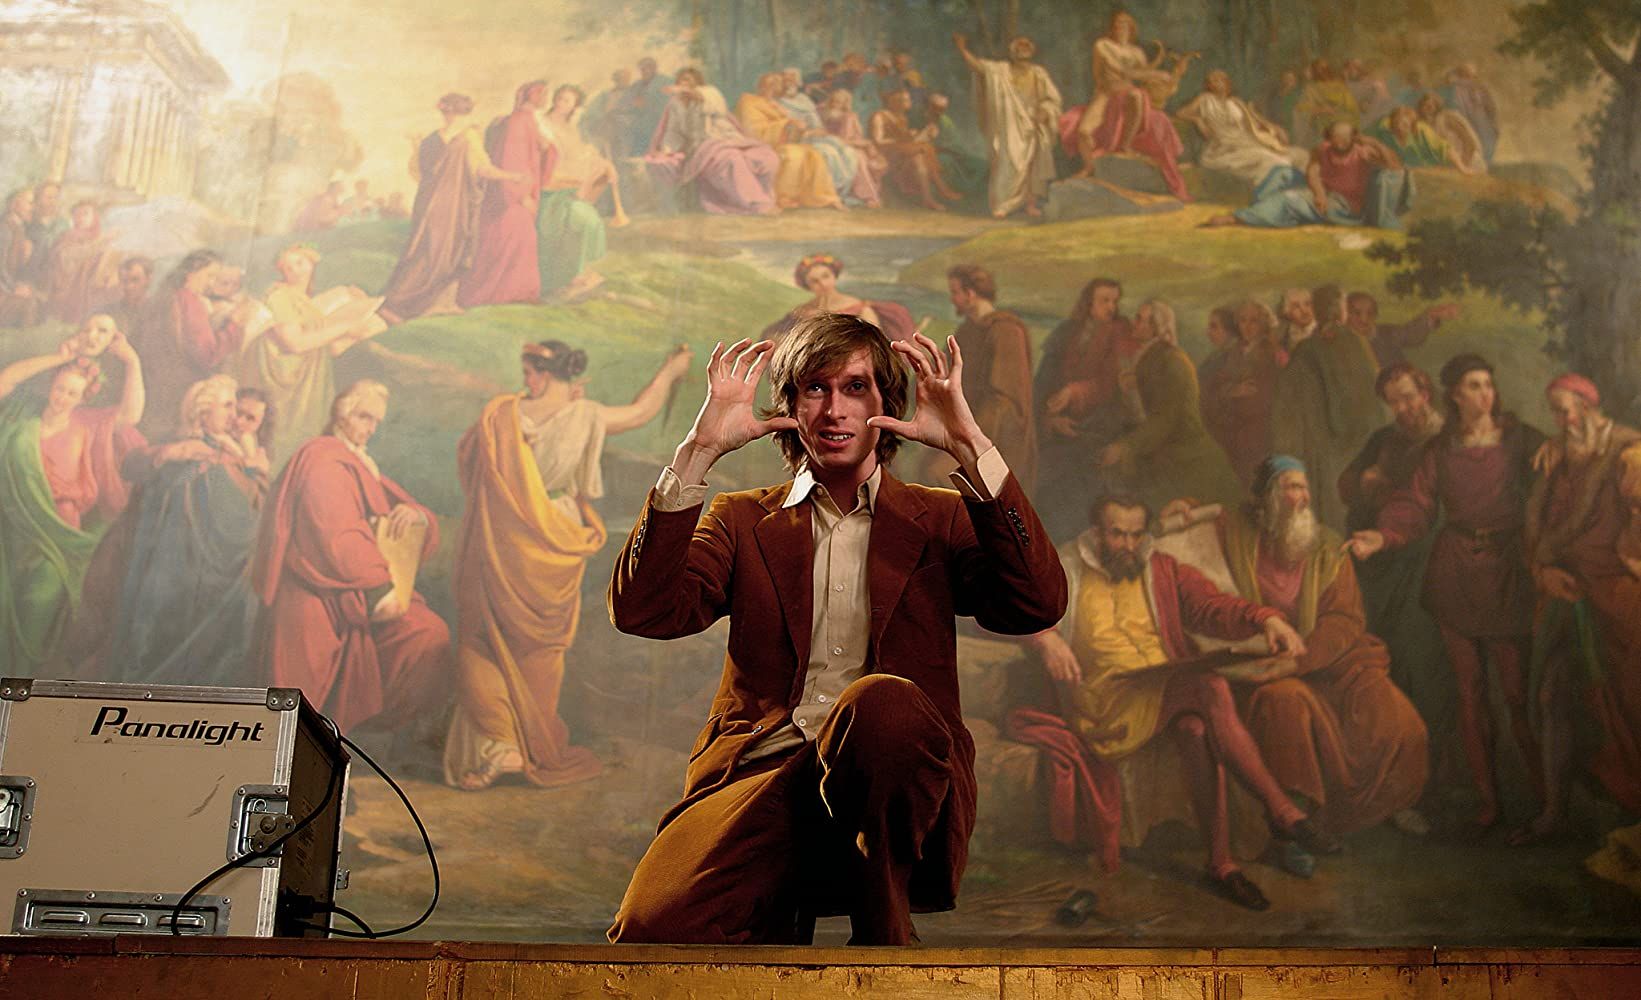 Wishing a happy birthday to Wes Anderson! 